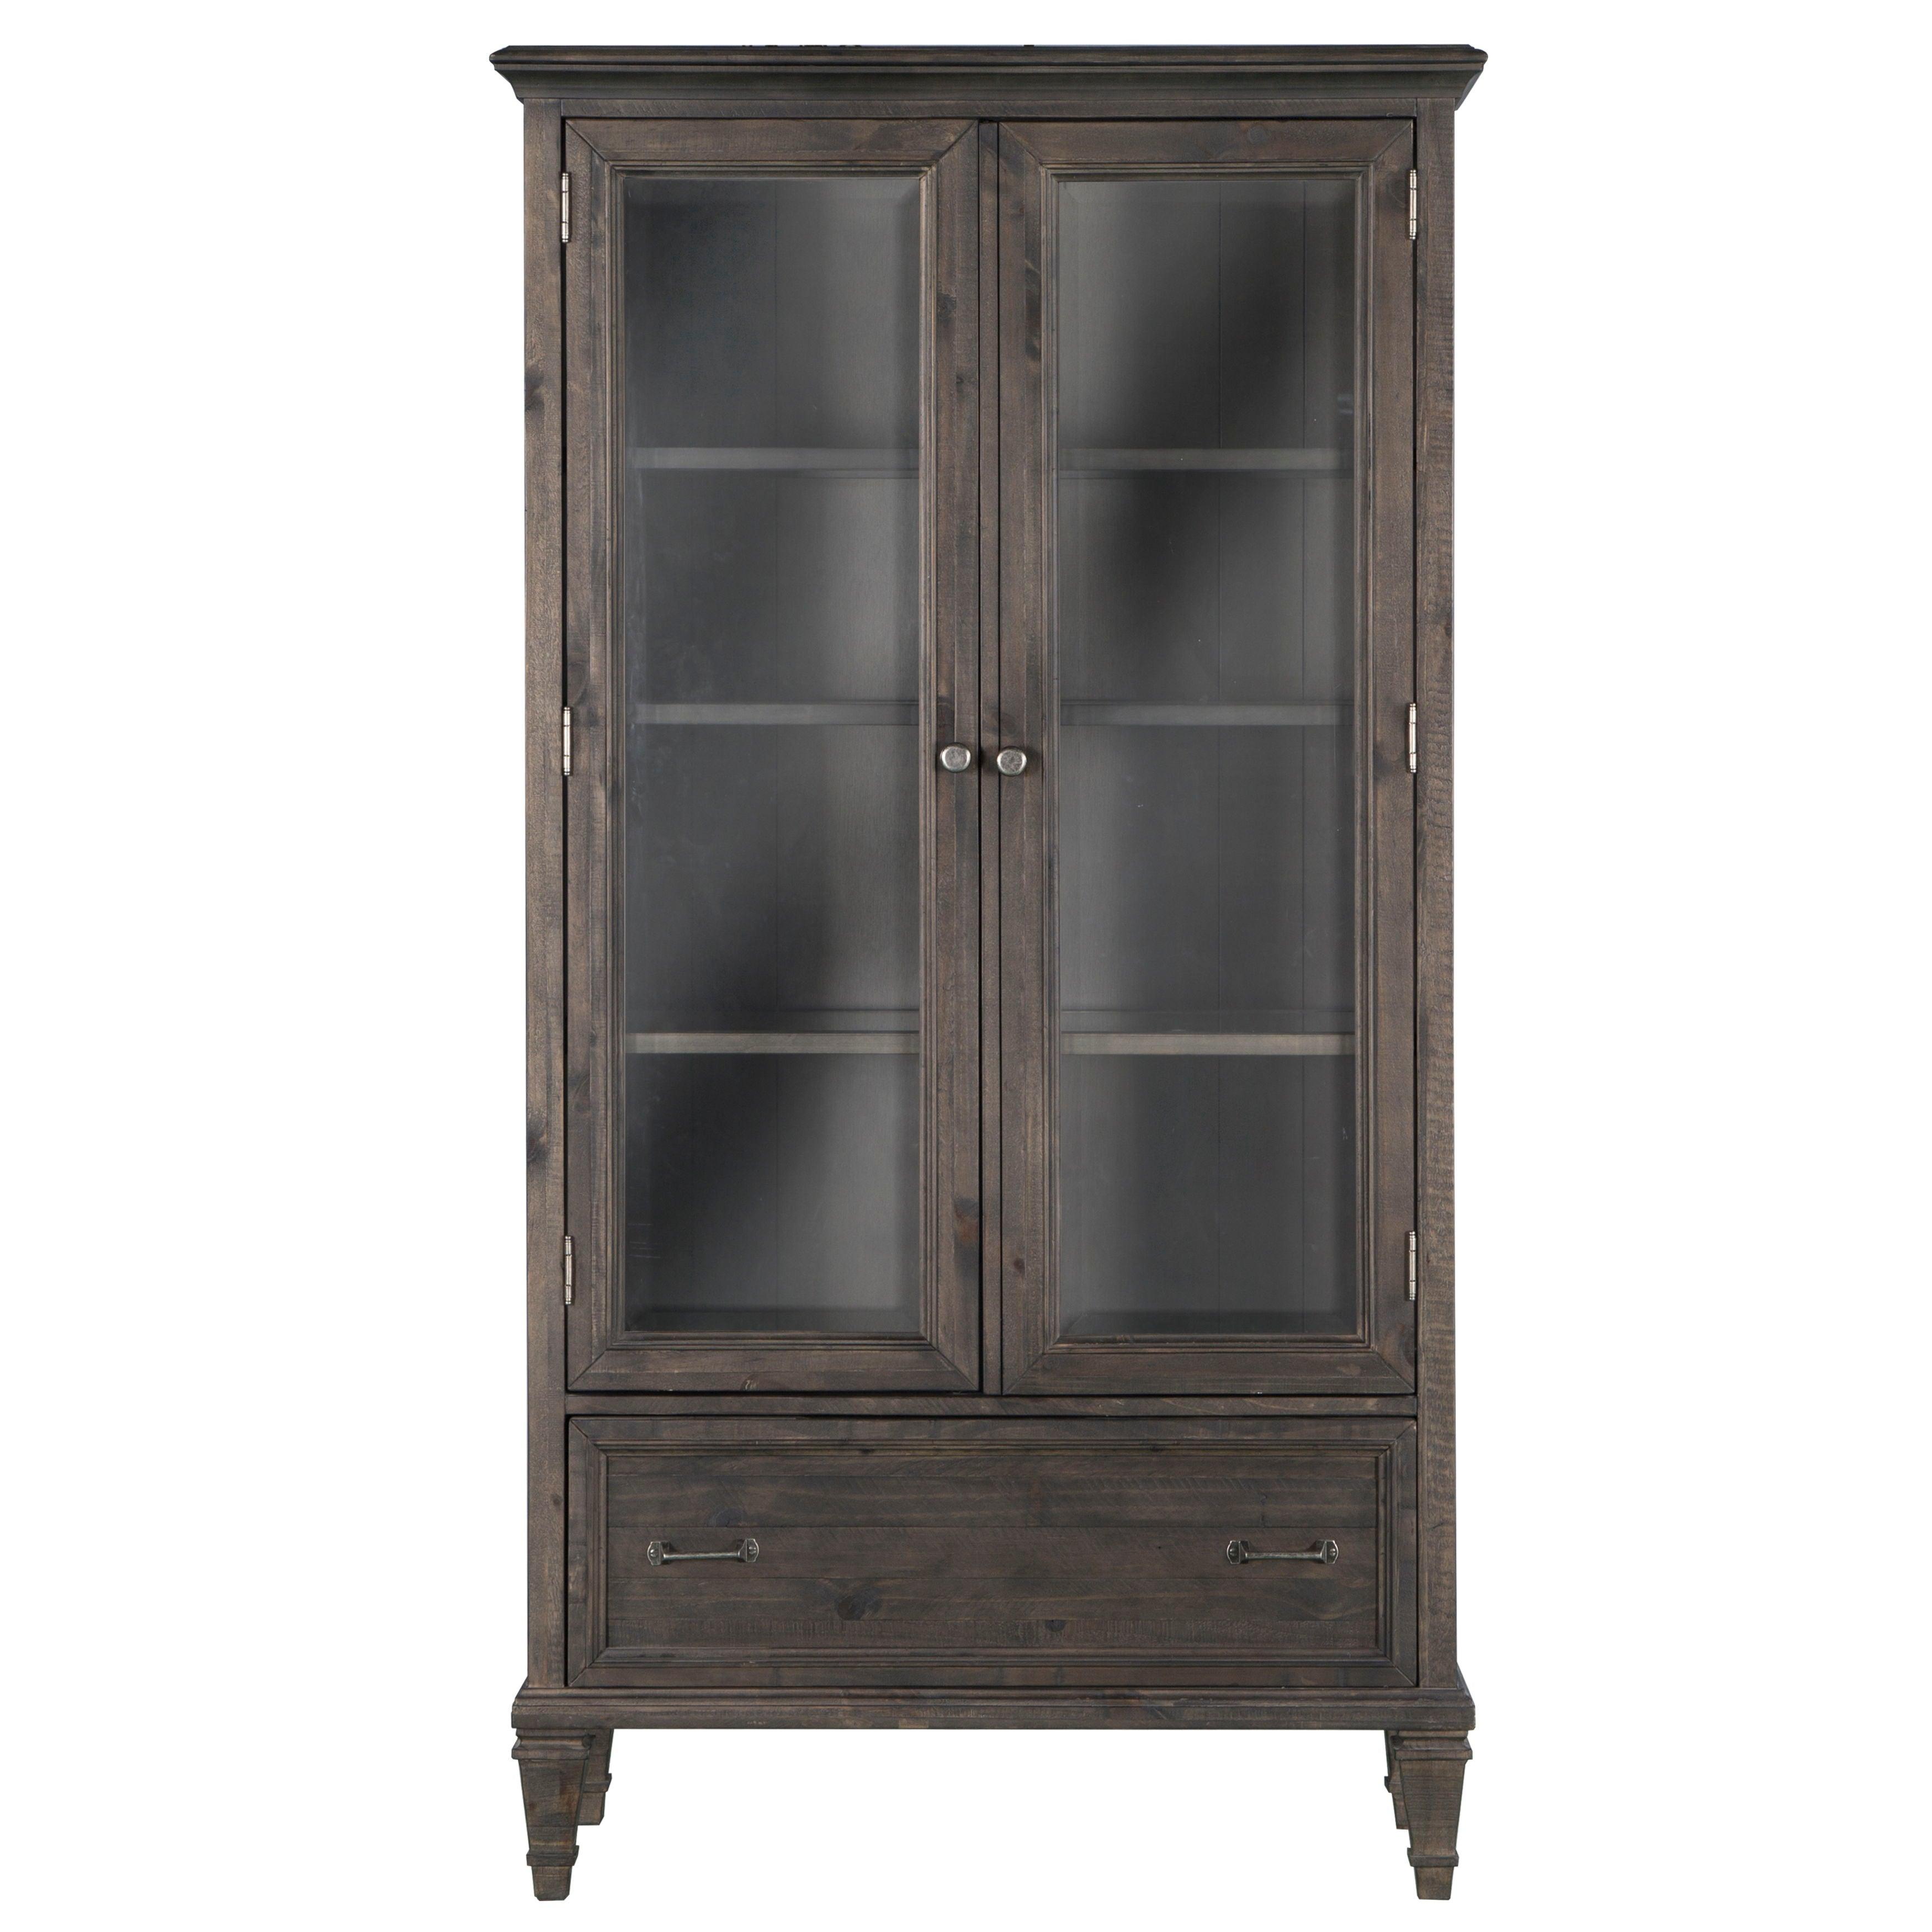 Magnussen Furniture - Sutton Place - Door Bookcase - Weathered Charcoal - 5th Avenue Furniture